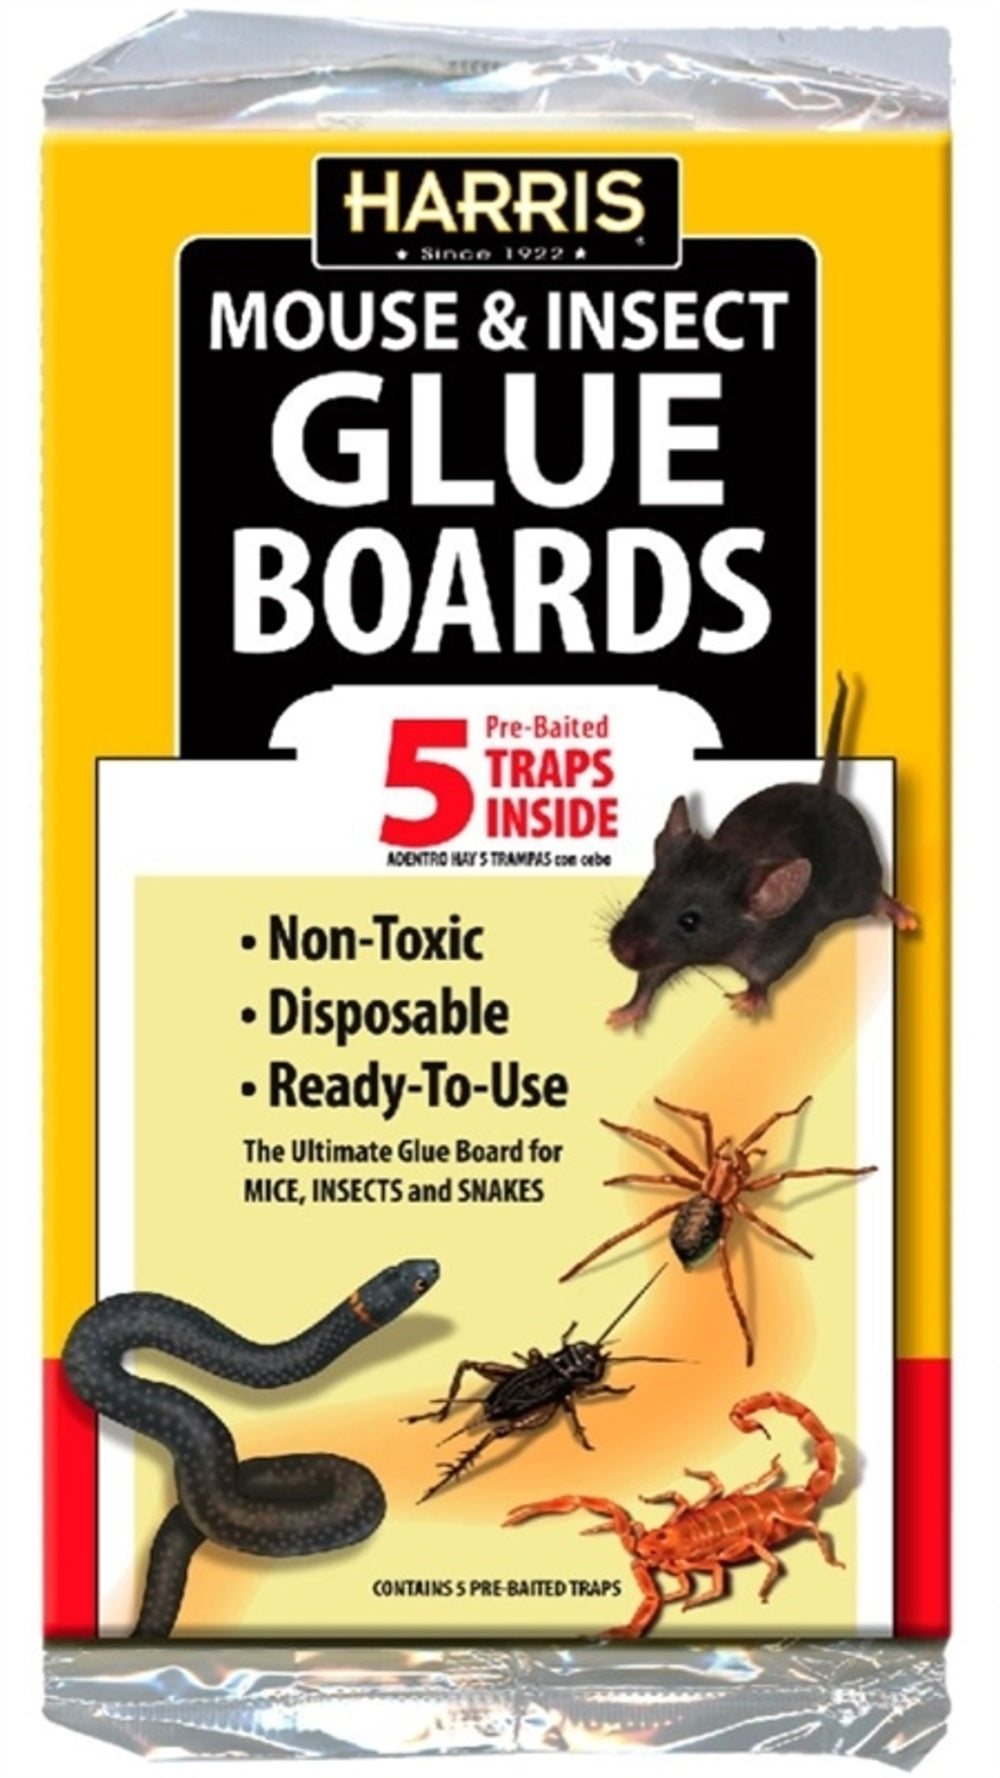 Harris GB-5 Mouse & Insect Glue Boards